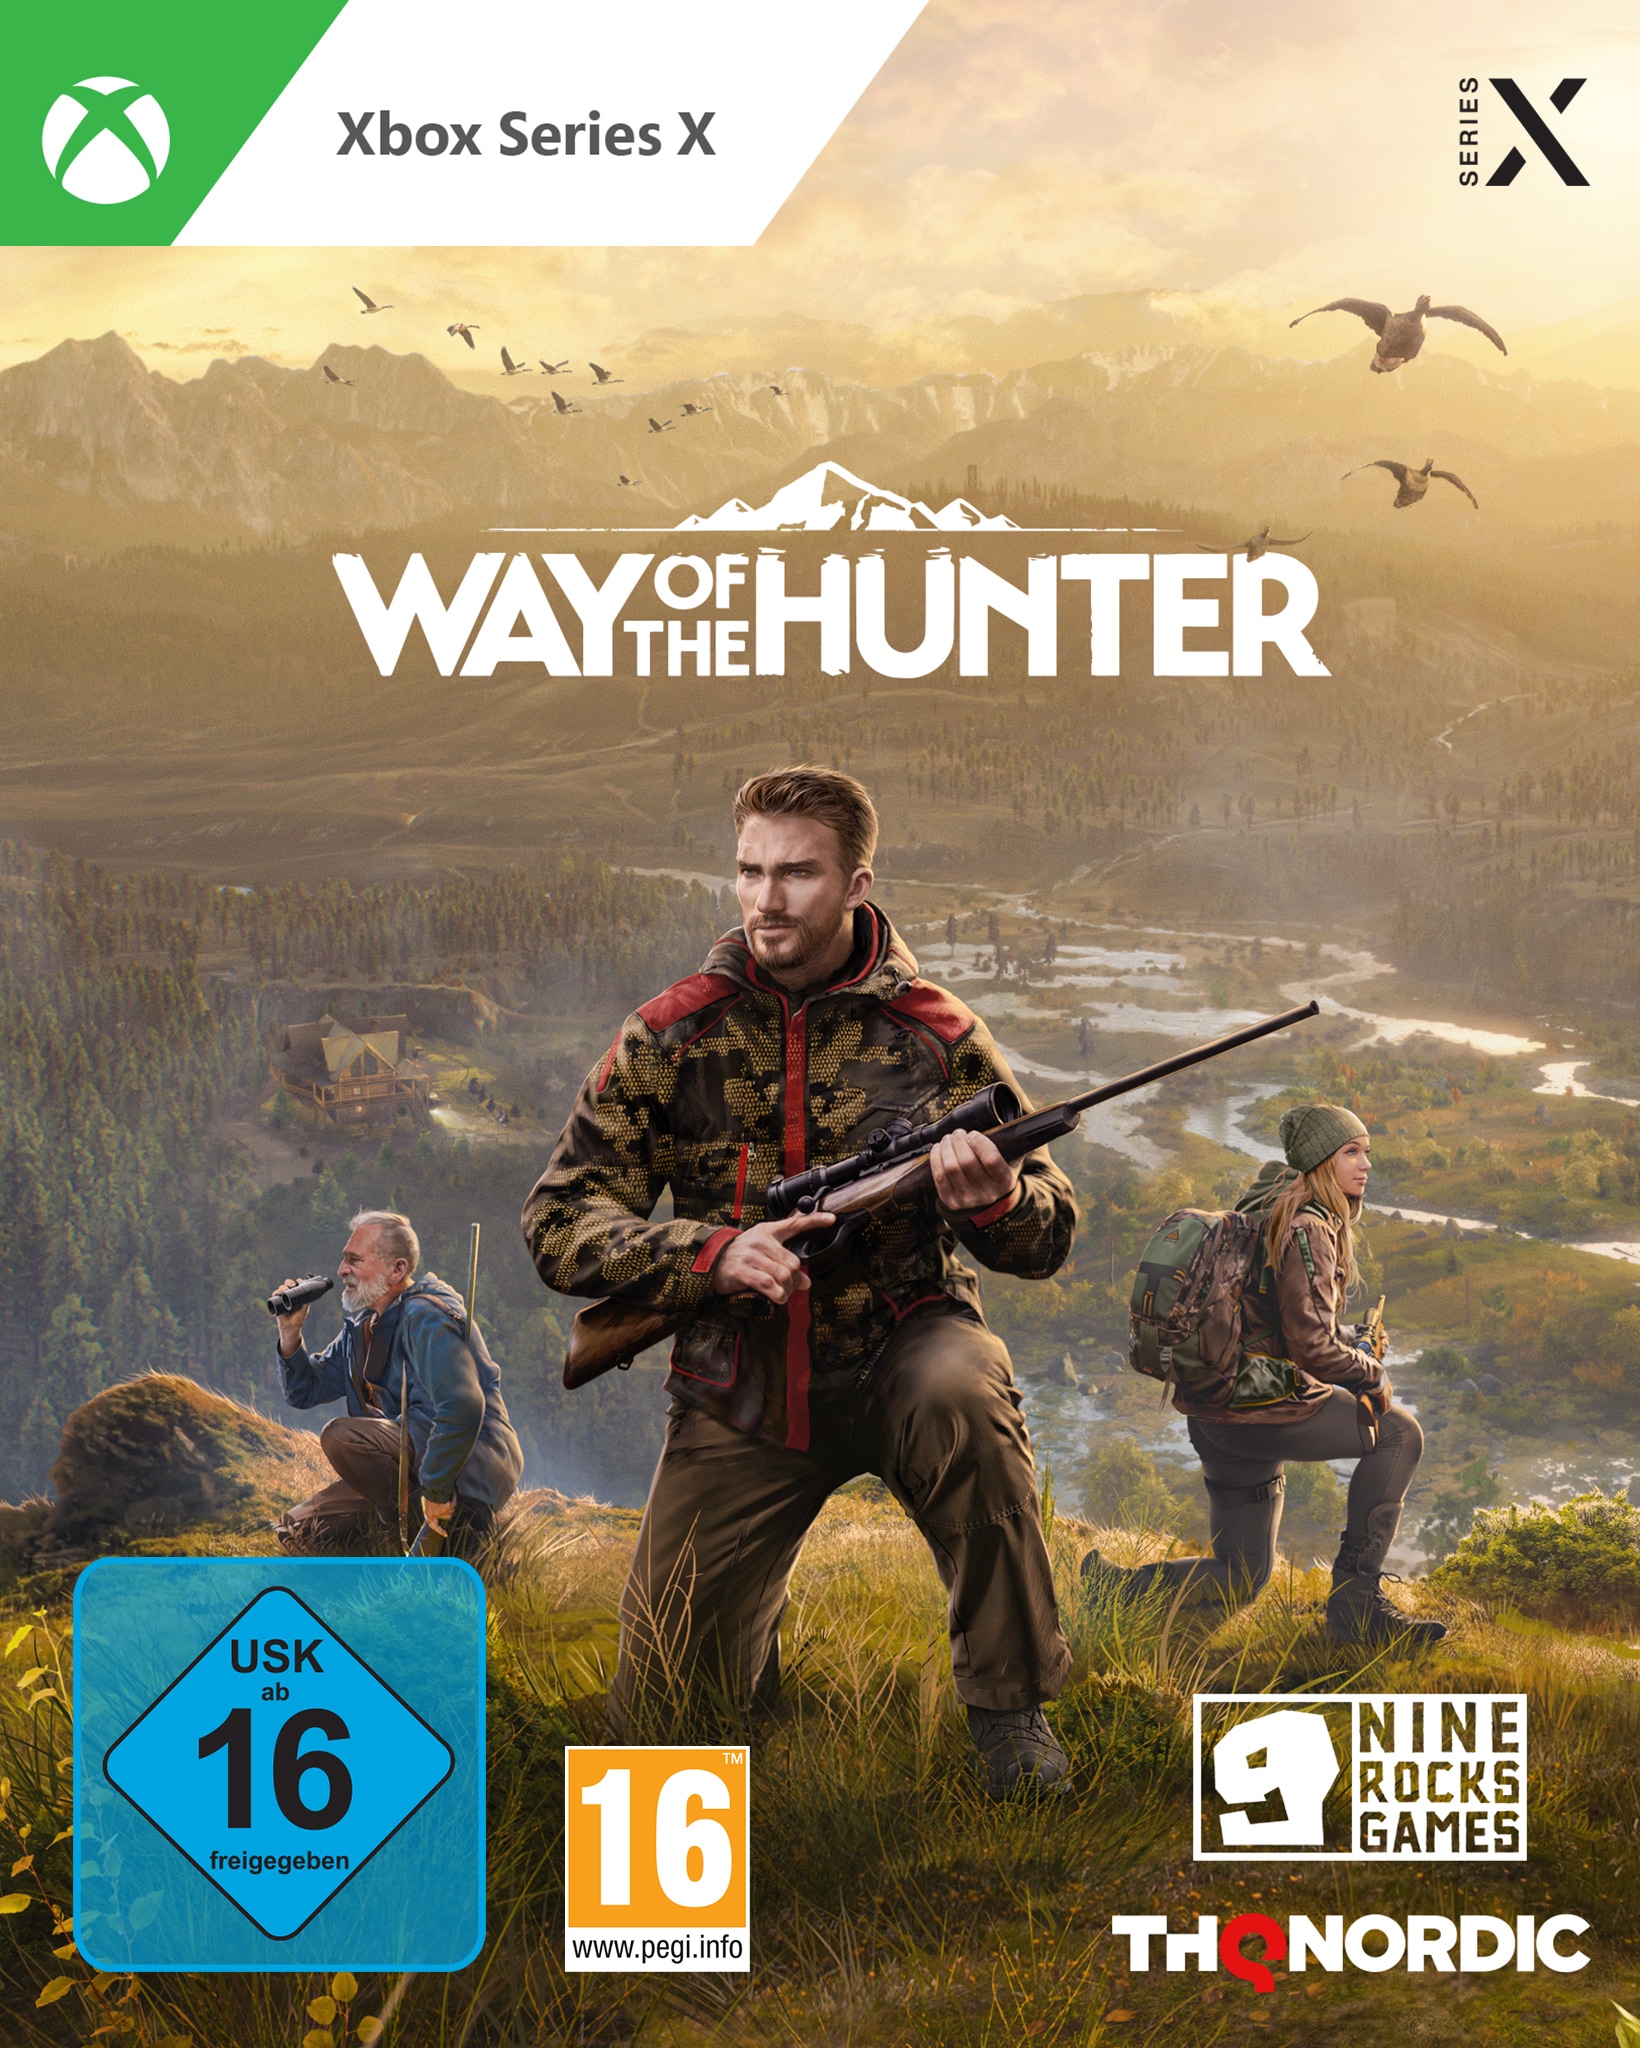 Spielesoftware »Way of the Hunter«, Xbox Series X